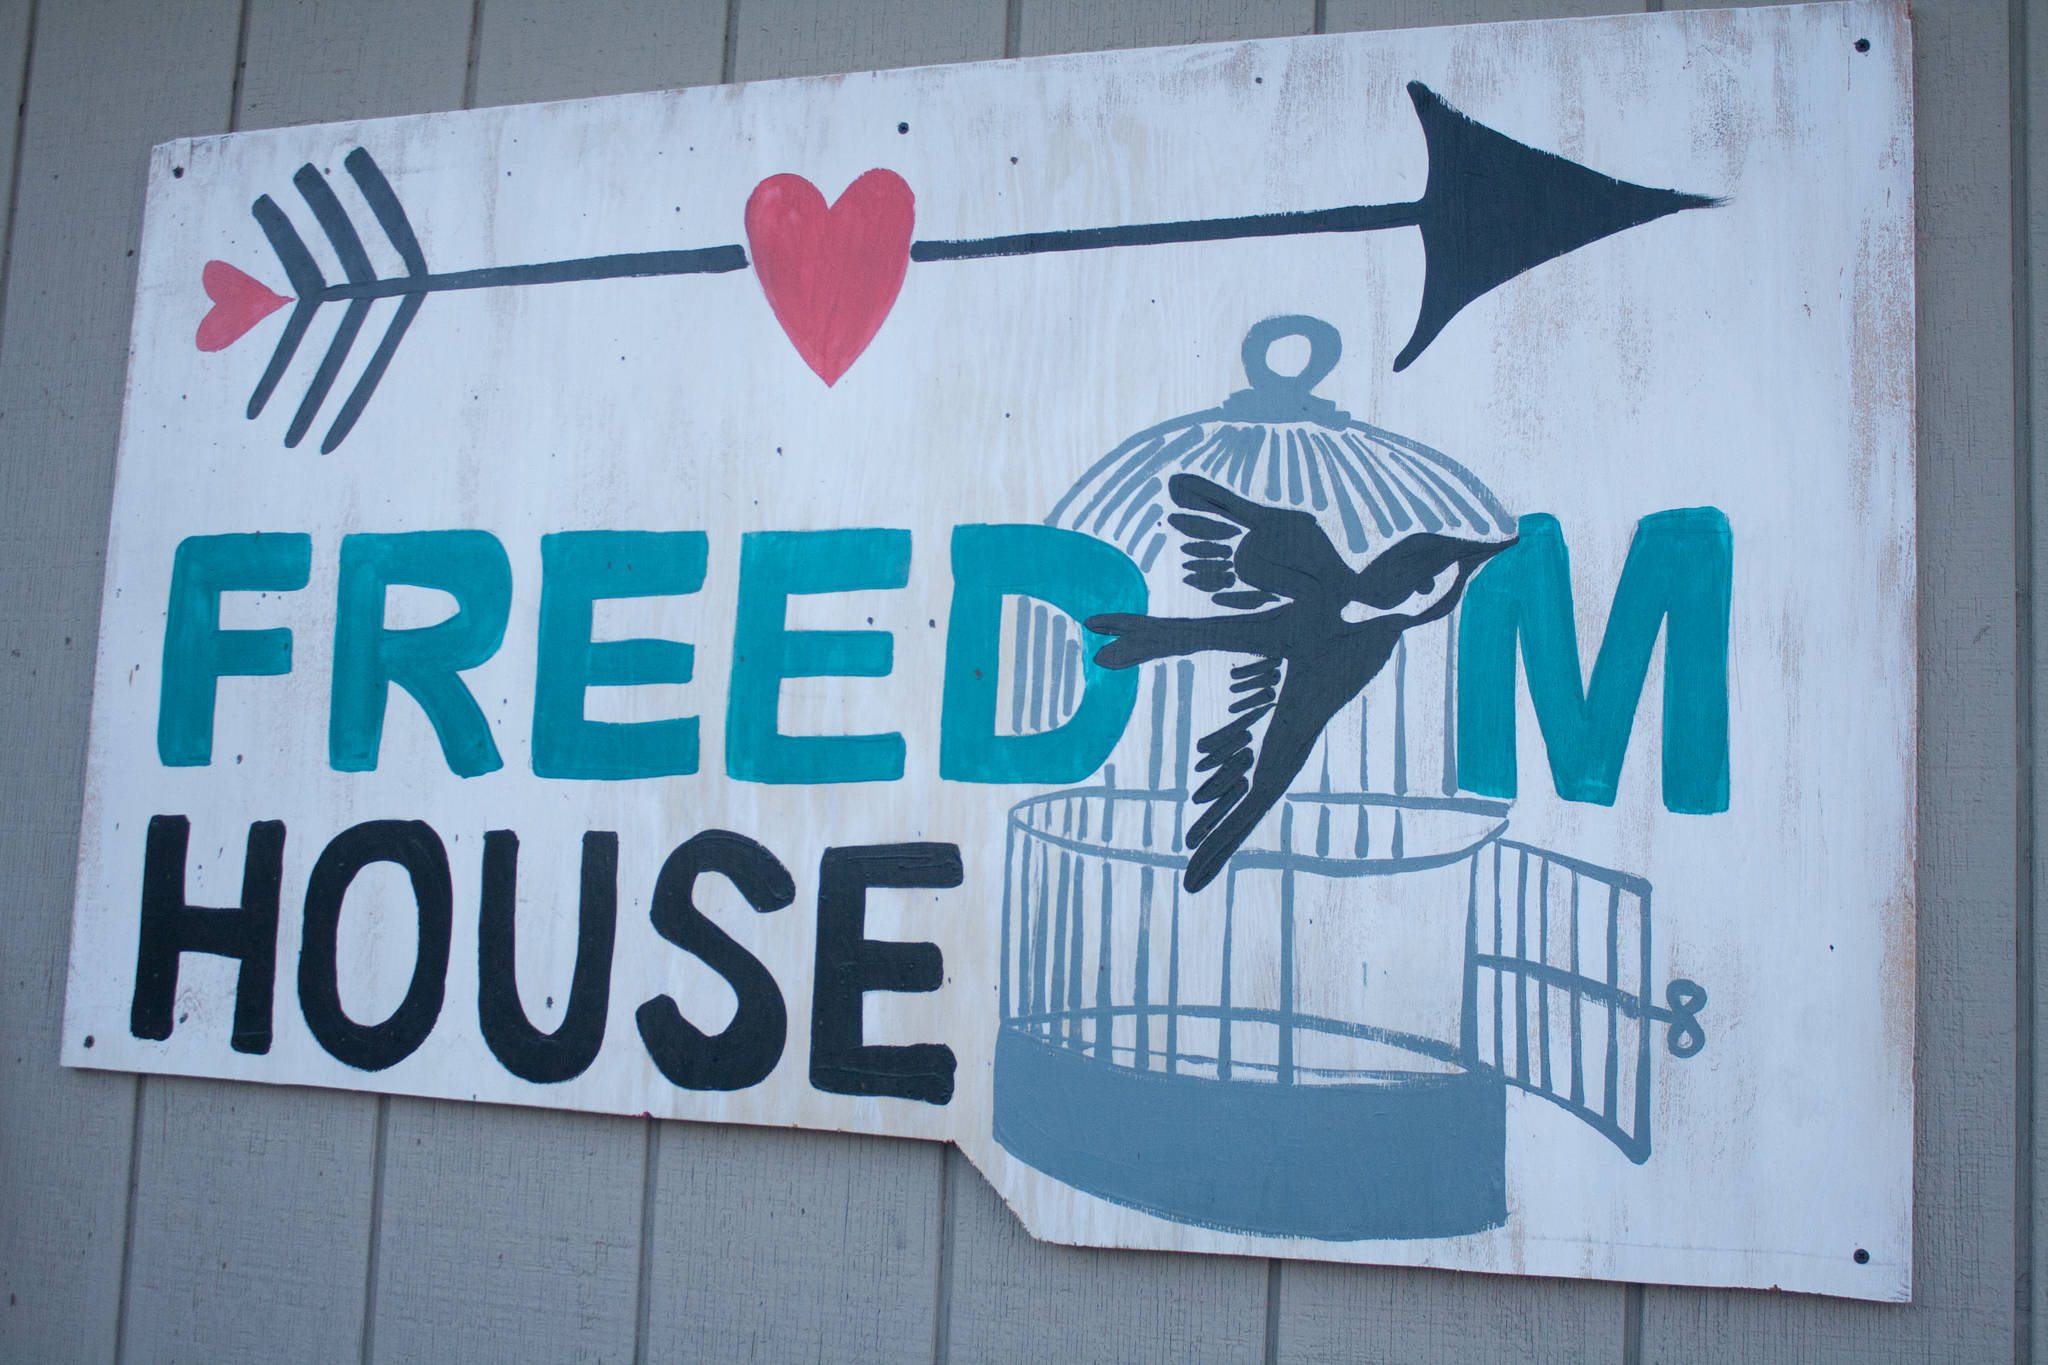 Soldotna’s Freedom House is a long-term residence for women transitioning to a sober lifestyle.